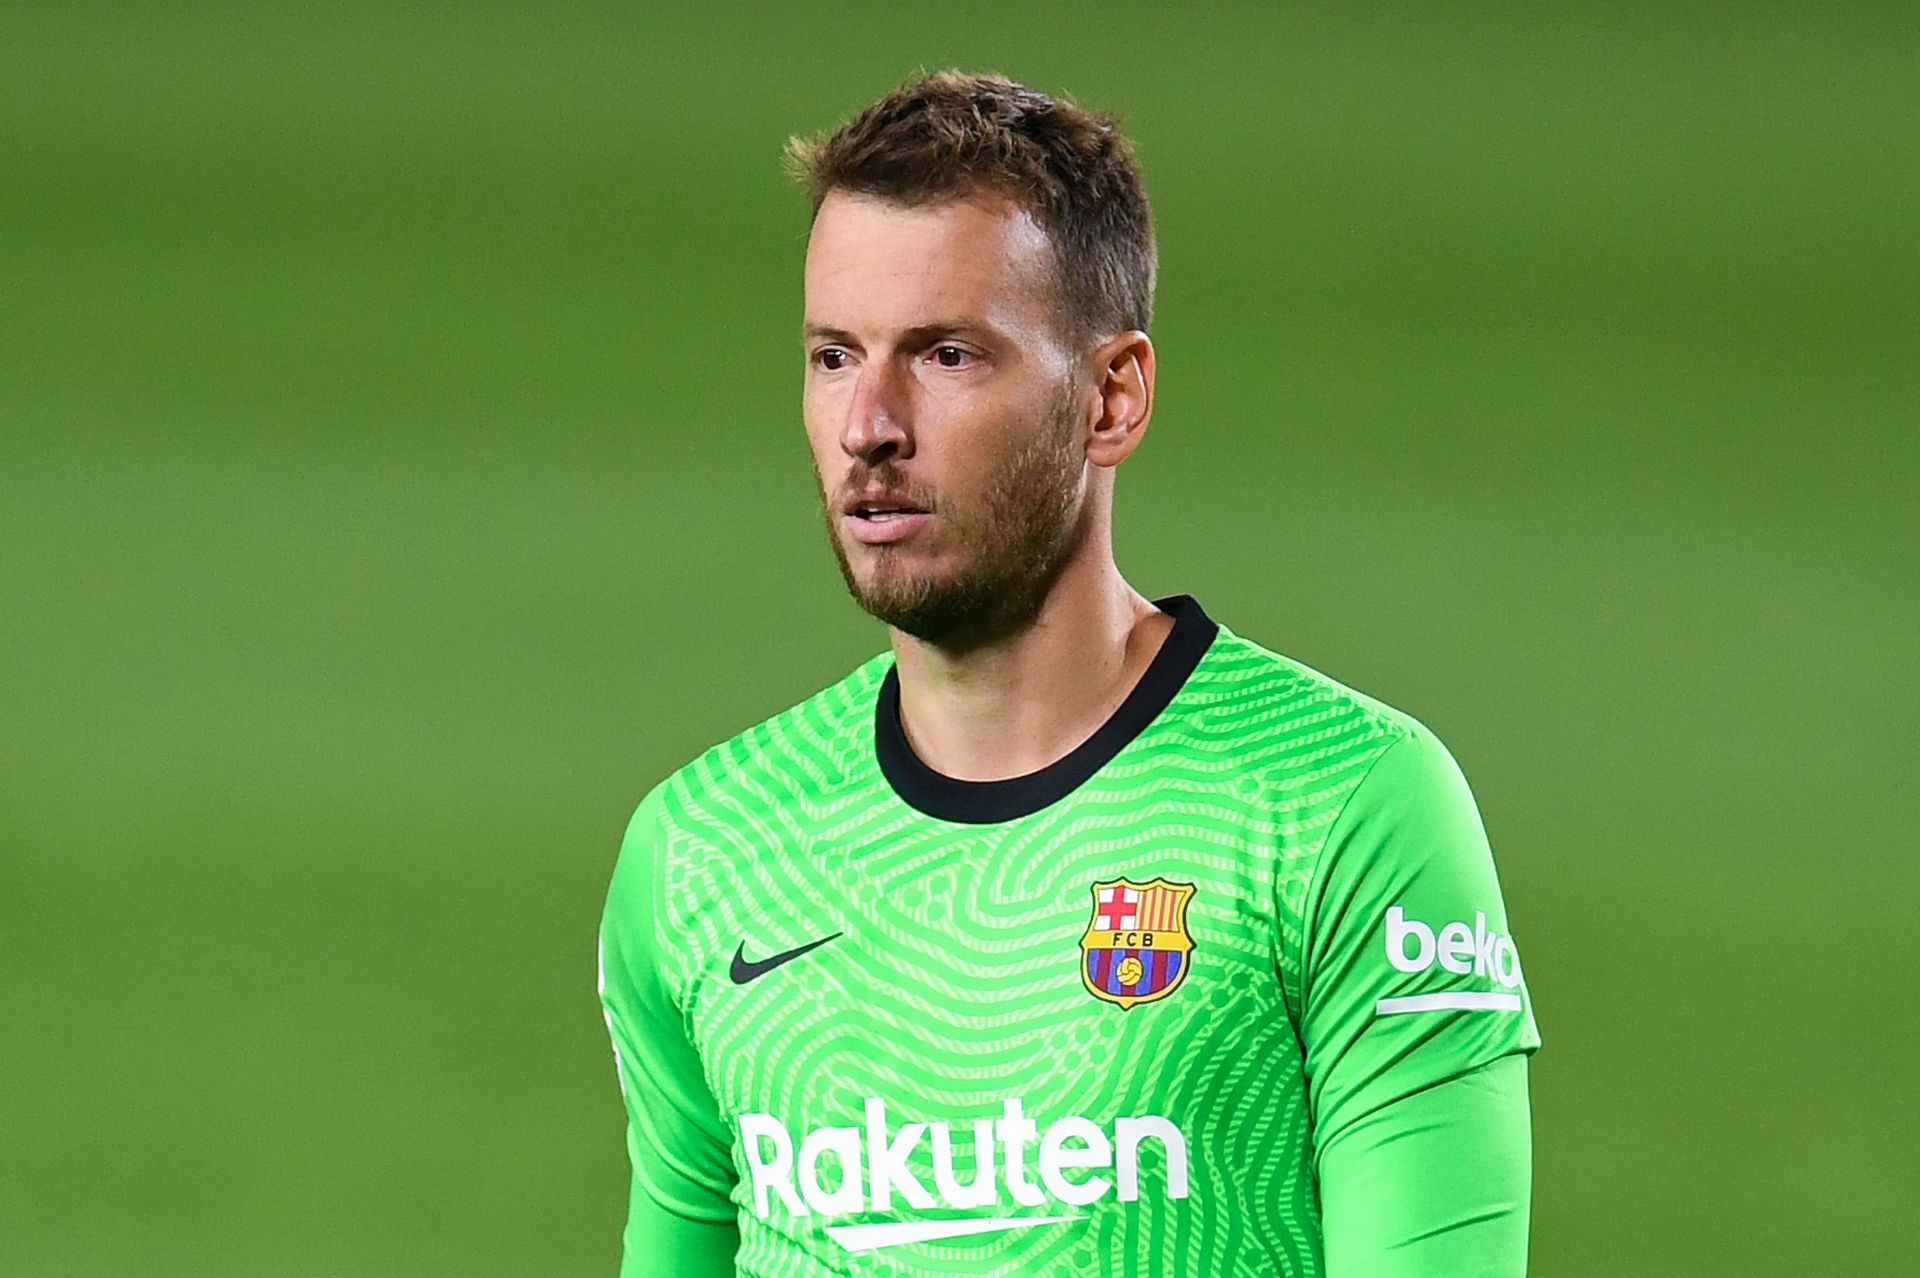 Neto is looking to leave Barcelona this window